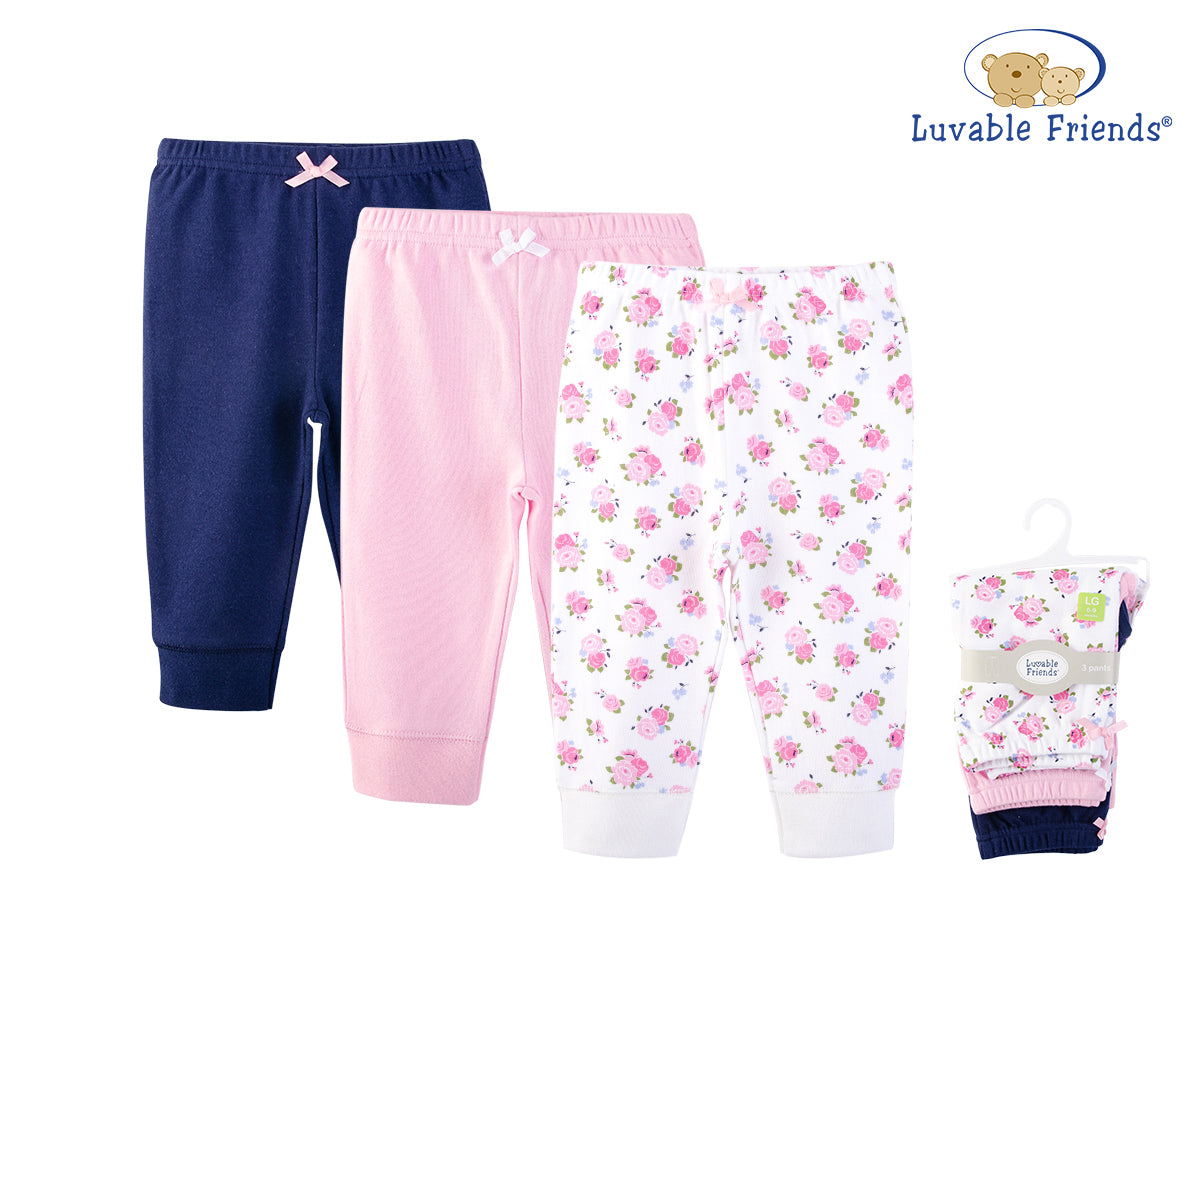 Luvable Friends Baby Girls Pants 3 Pairs Pack 32346 - 1116 - Little Kooma